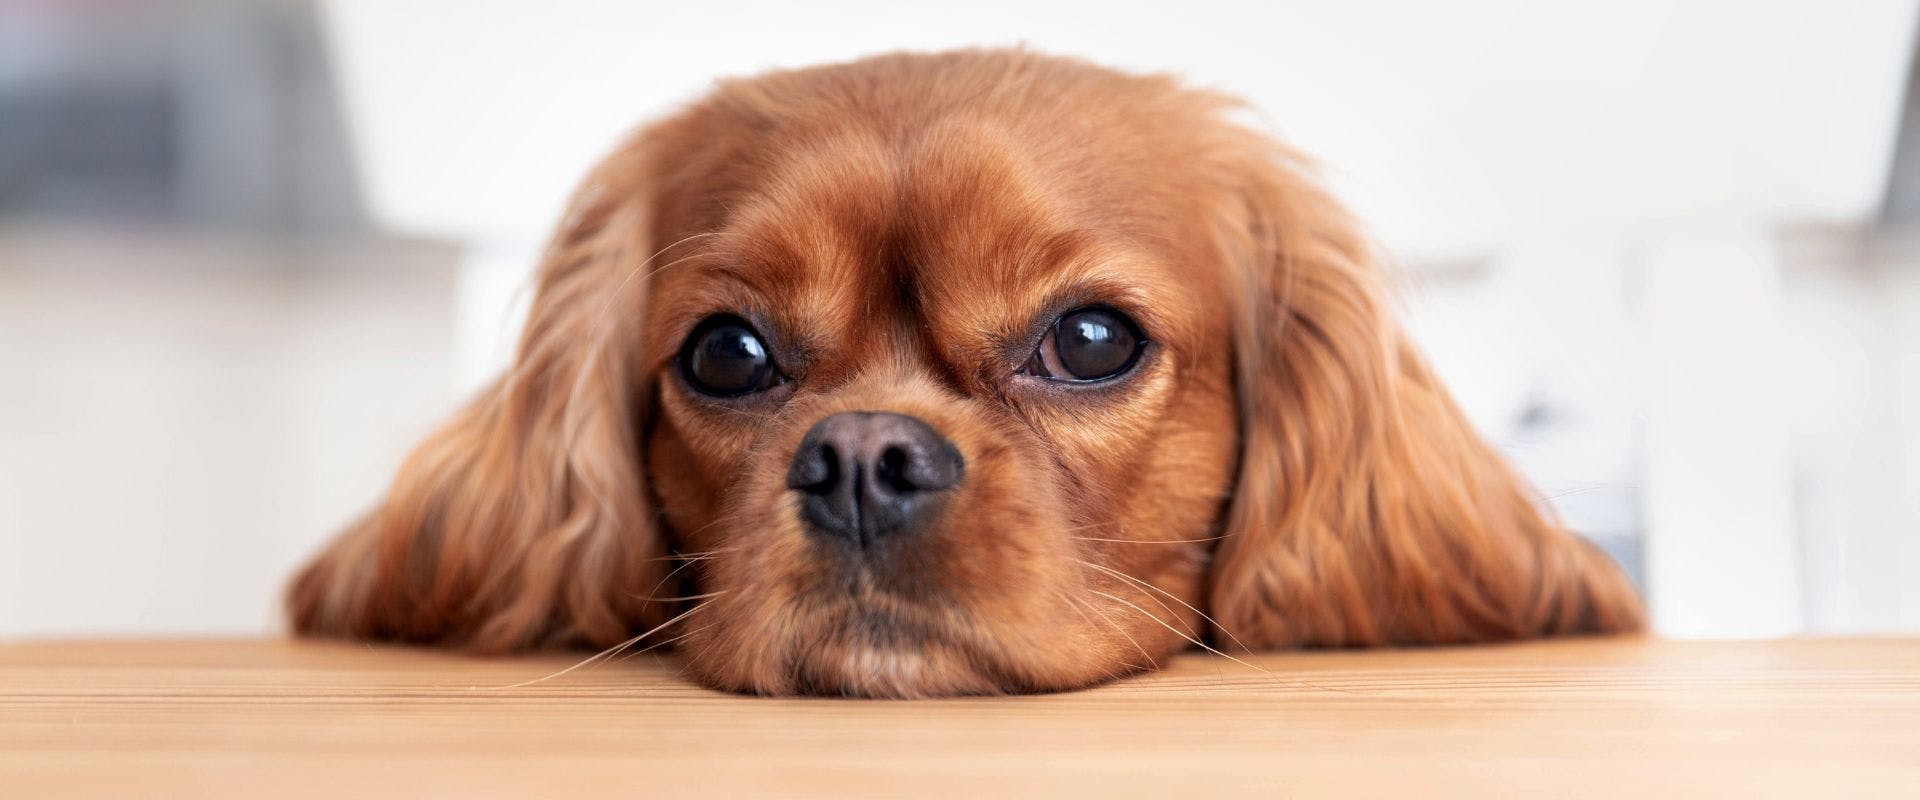 Cavalier King Charles Spaniel waiting at a wooden dinner table